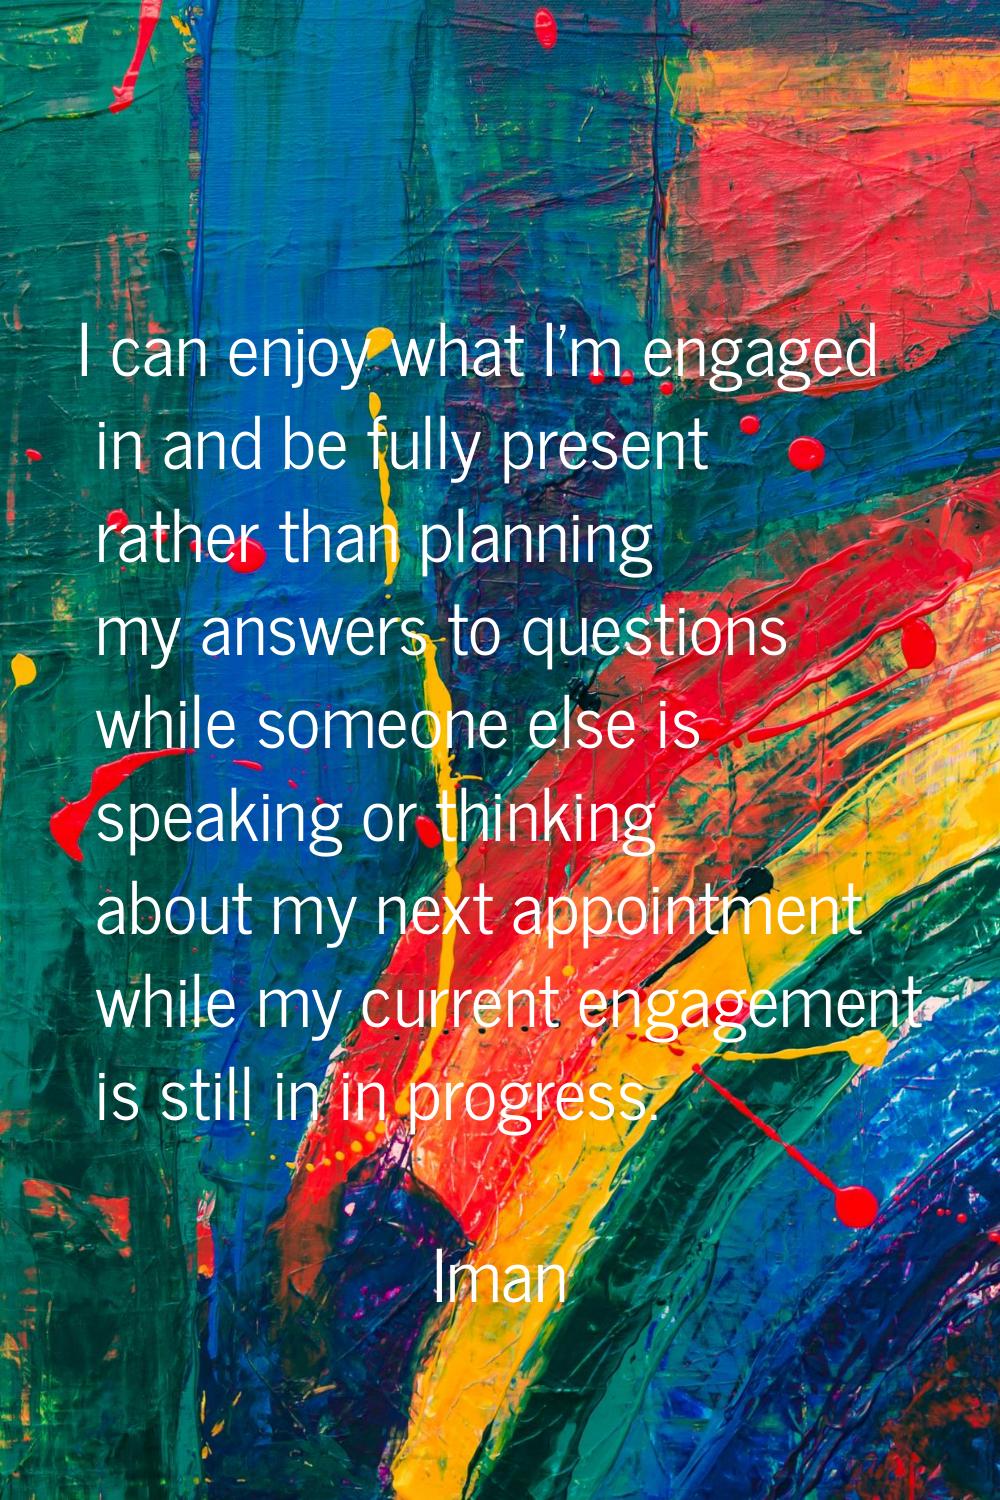 I can enjoy what I'm engaged in and be fully present rather than planning my answers to questions w